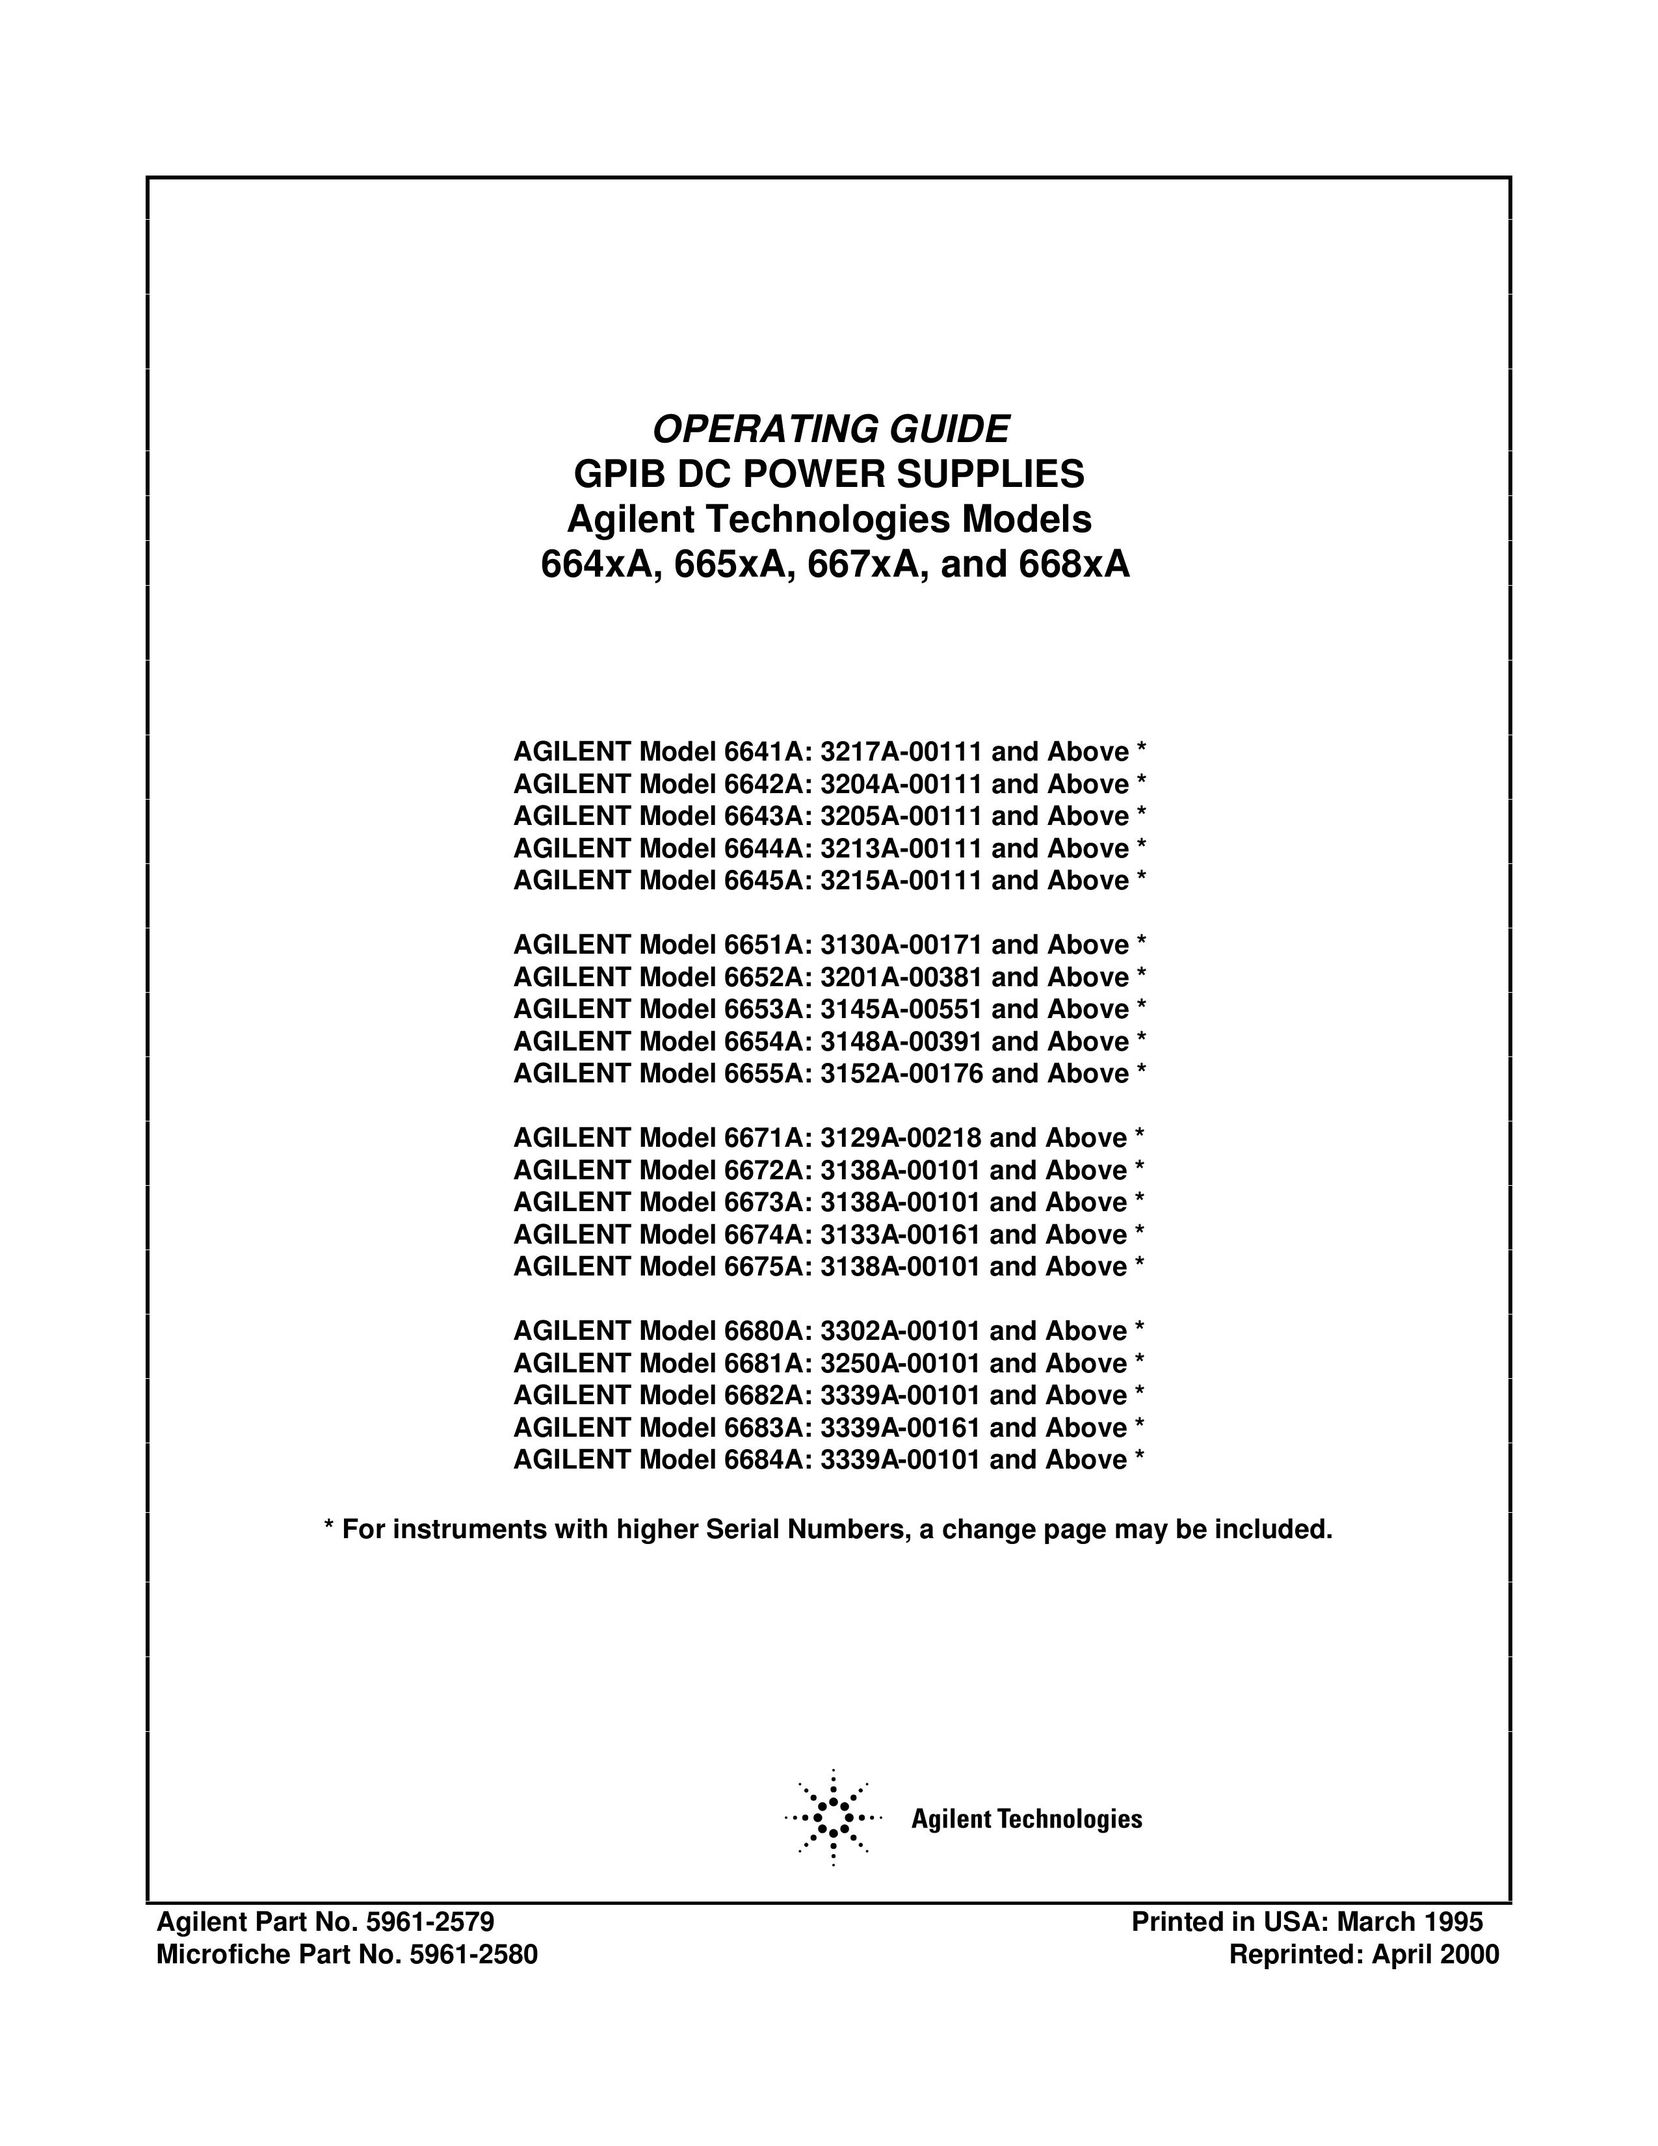 Agilent Technologies Model 6654A: 3148A-00391 Video Gaming Accessories User Manual (Page 1)